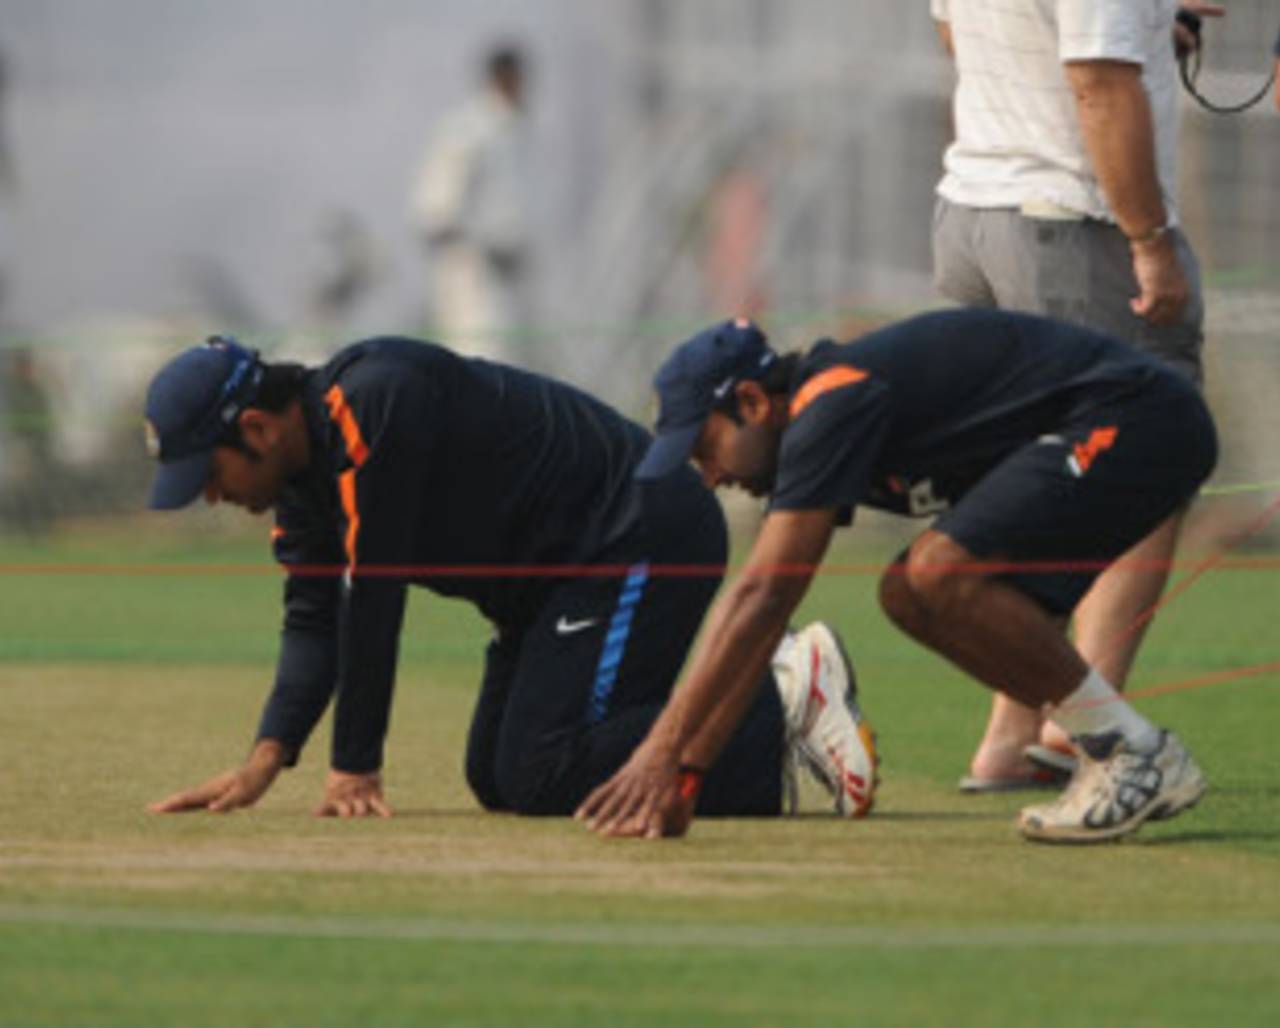 MS Dhoni and Amit Mishra examine the pitch at the Eden Gardens, Kolkata, February 12, 2010